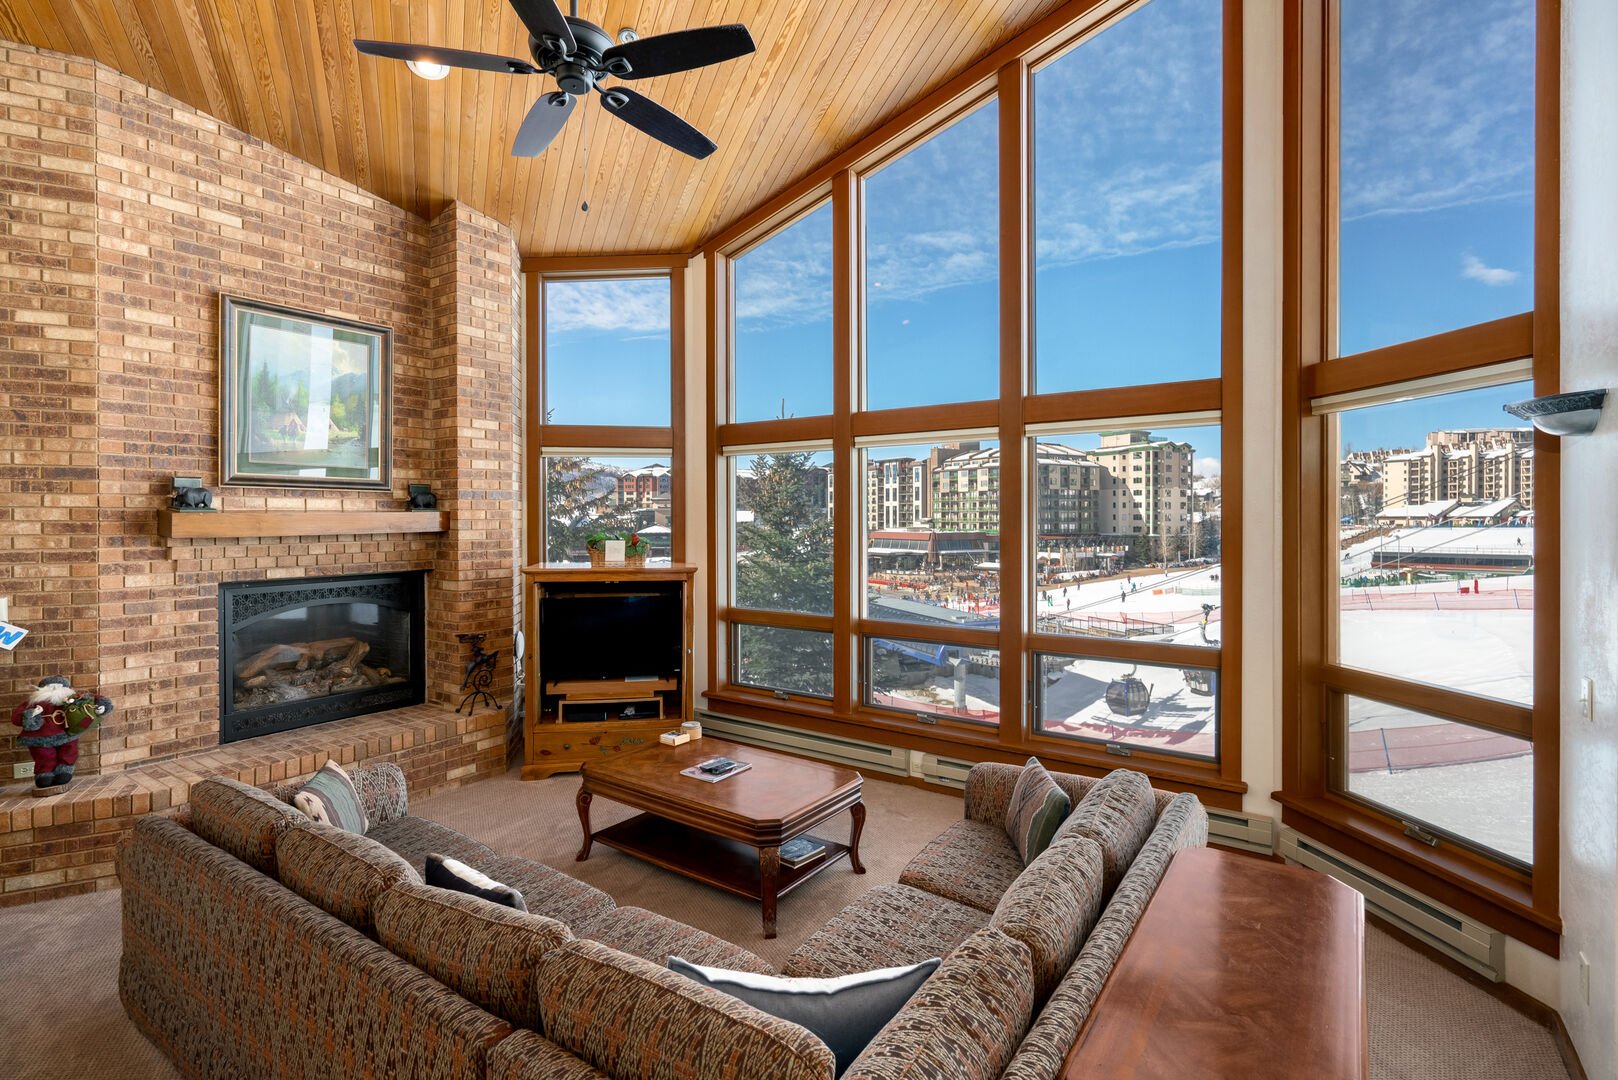 Views and location can't be beat at this Chateau Chamonix condo!!